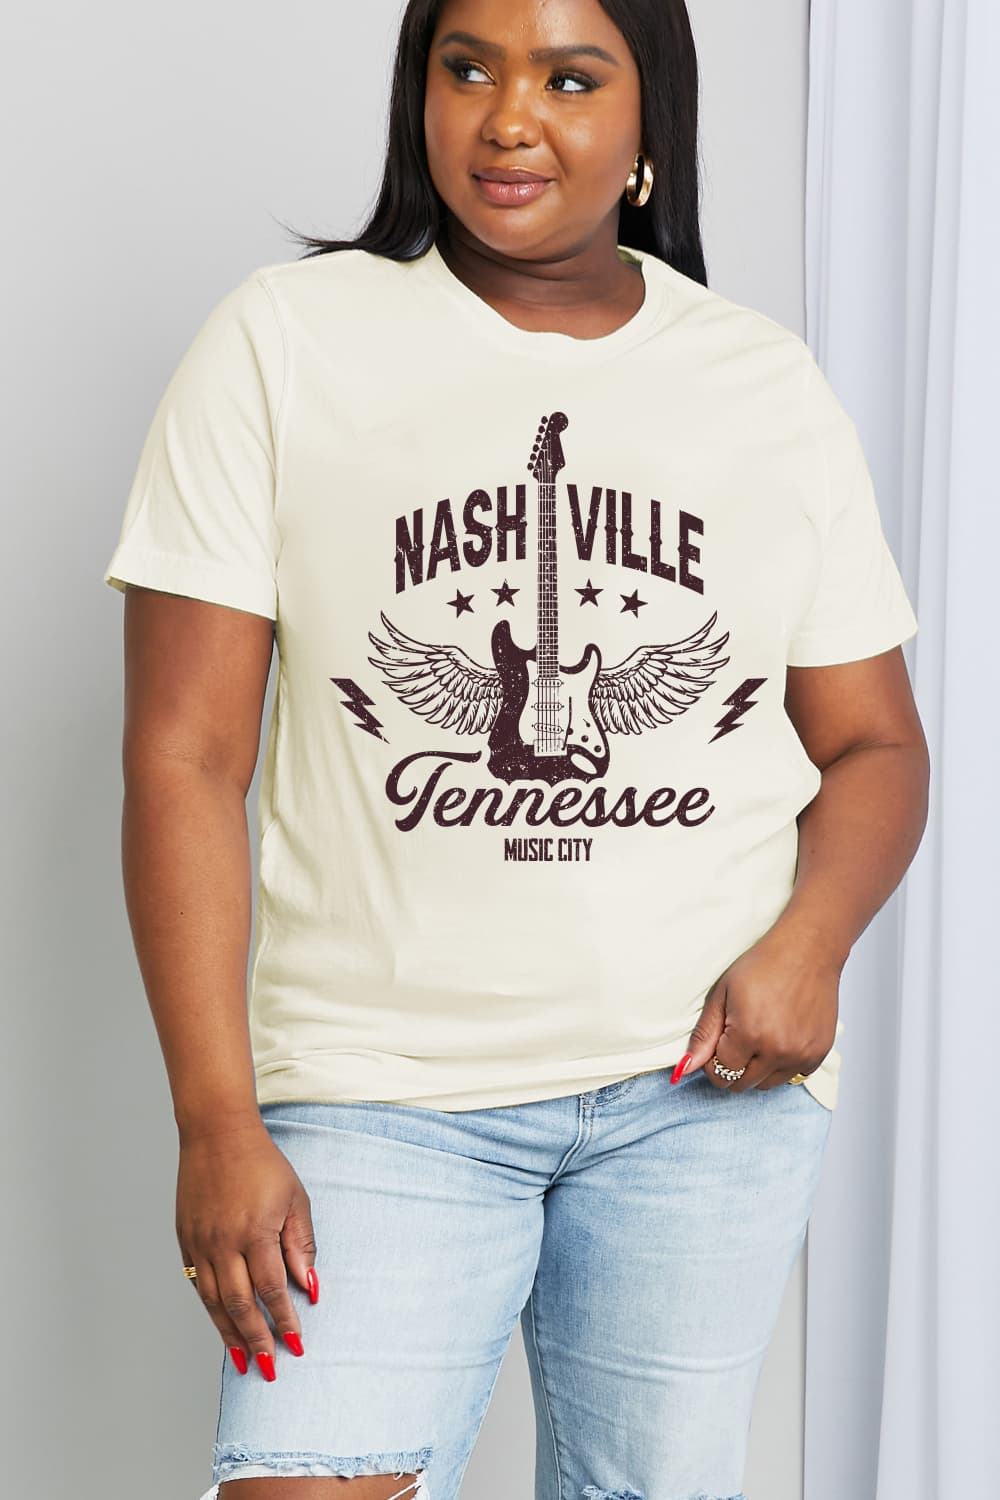 Simply Love Full Size NASHVILLE TENNESSEE MUSIC CITY Graphic Cotton Tee BLUE ZONE PLANET